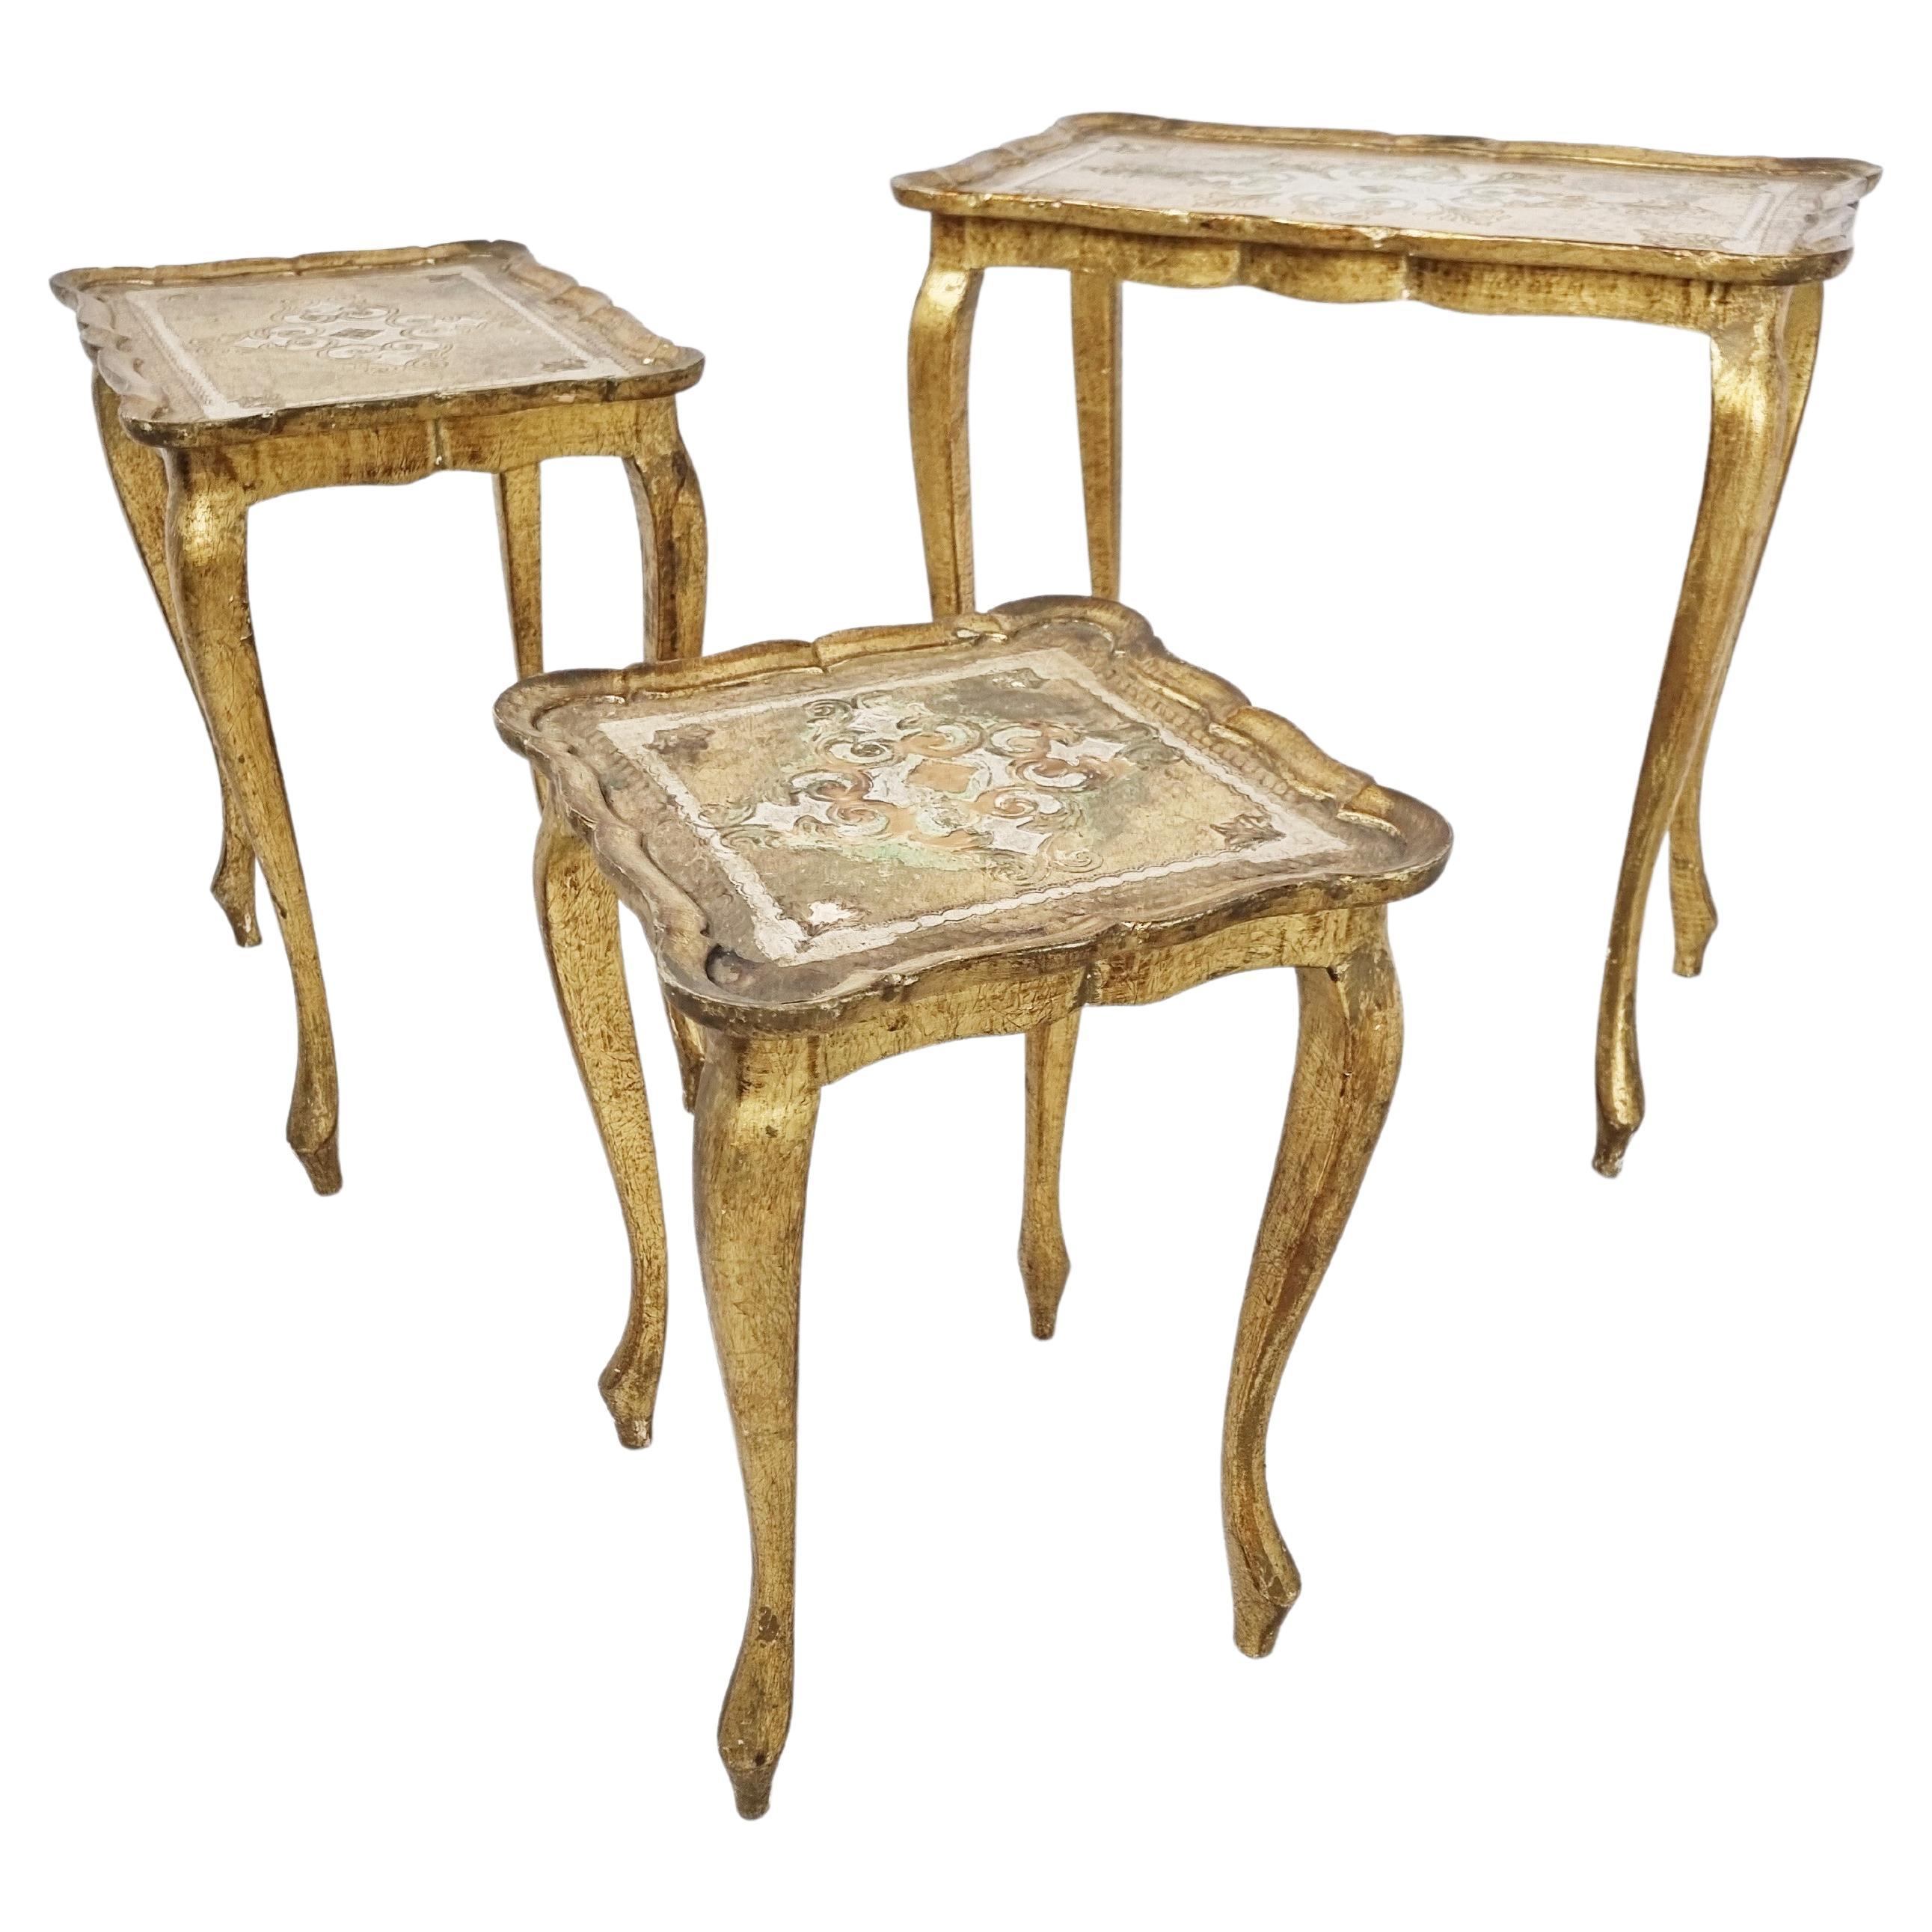 Florentine Nesting Tables by Fratelli Paoletti, 1950s For Sale